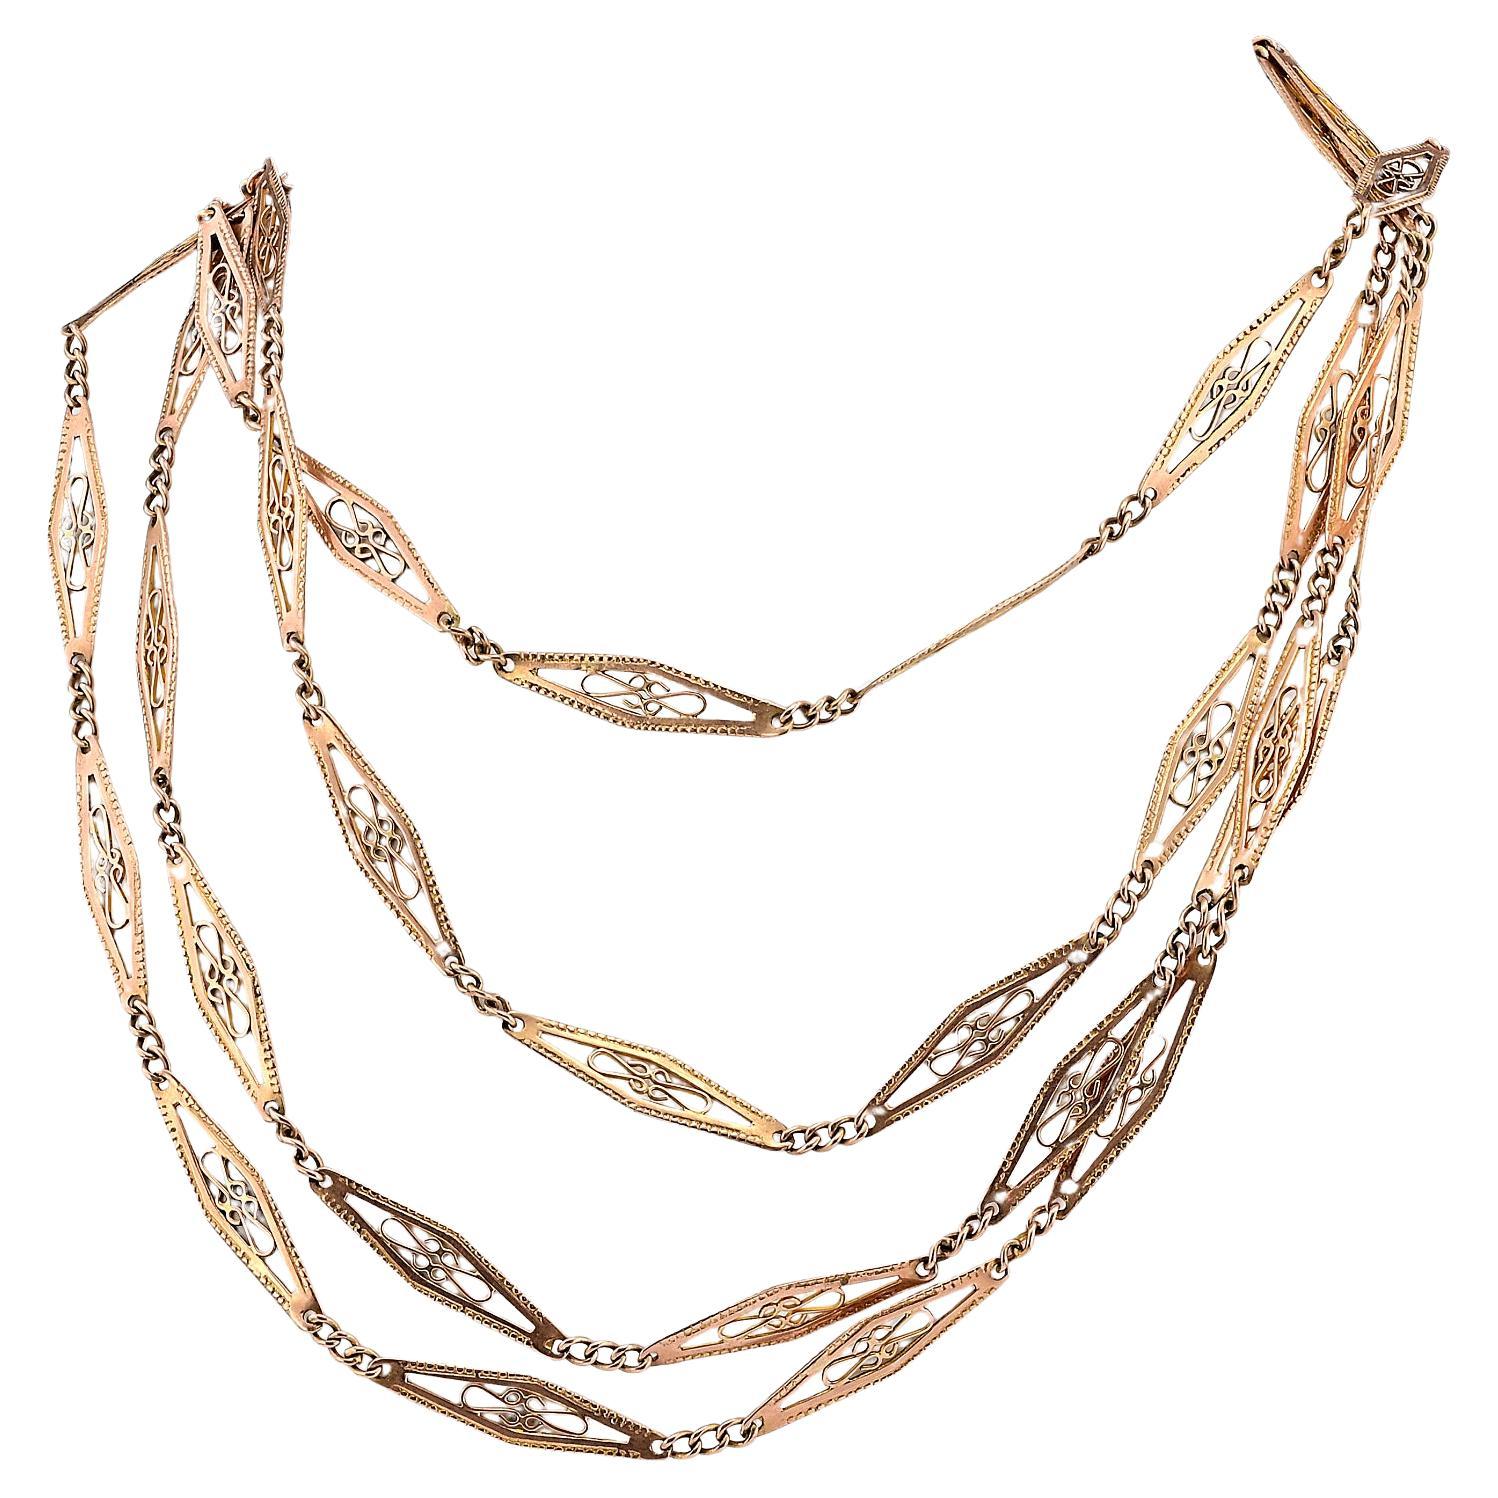 This rare and beautiful Art Nouveau period chain necklace is 1905 ca Solid 9 KT 